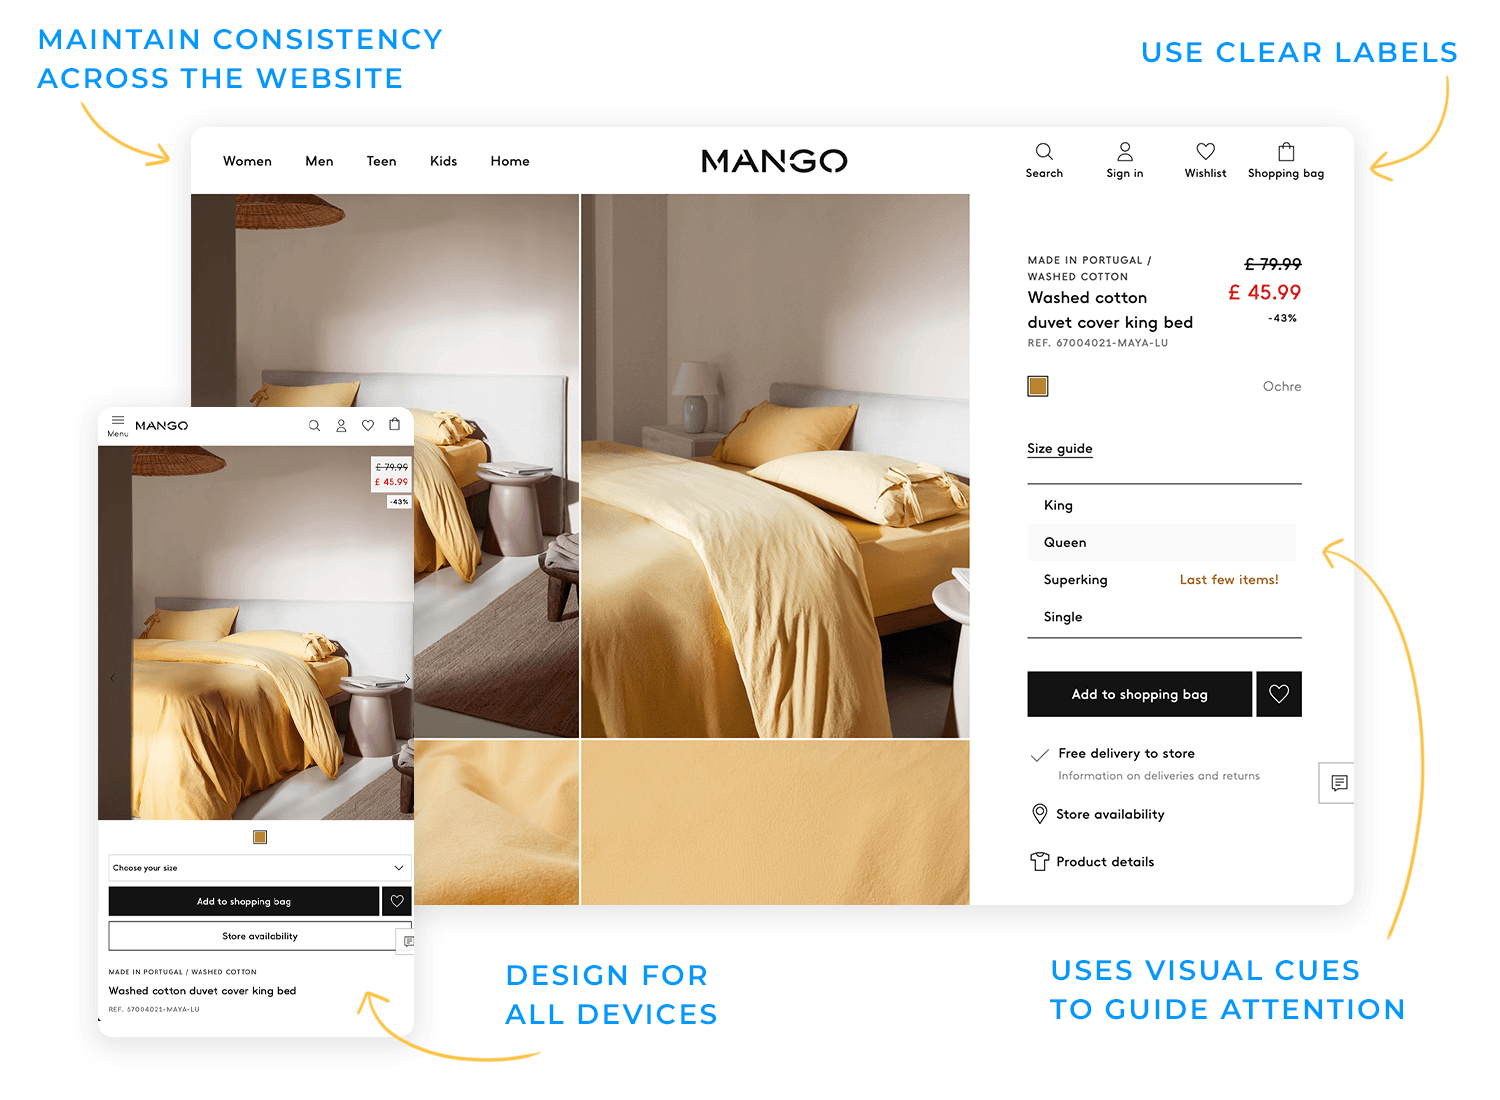 Ecommerce site using visual cues for navigation design.